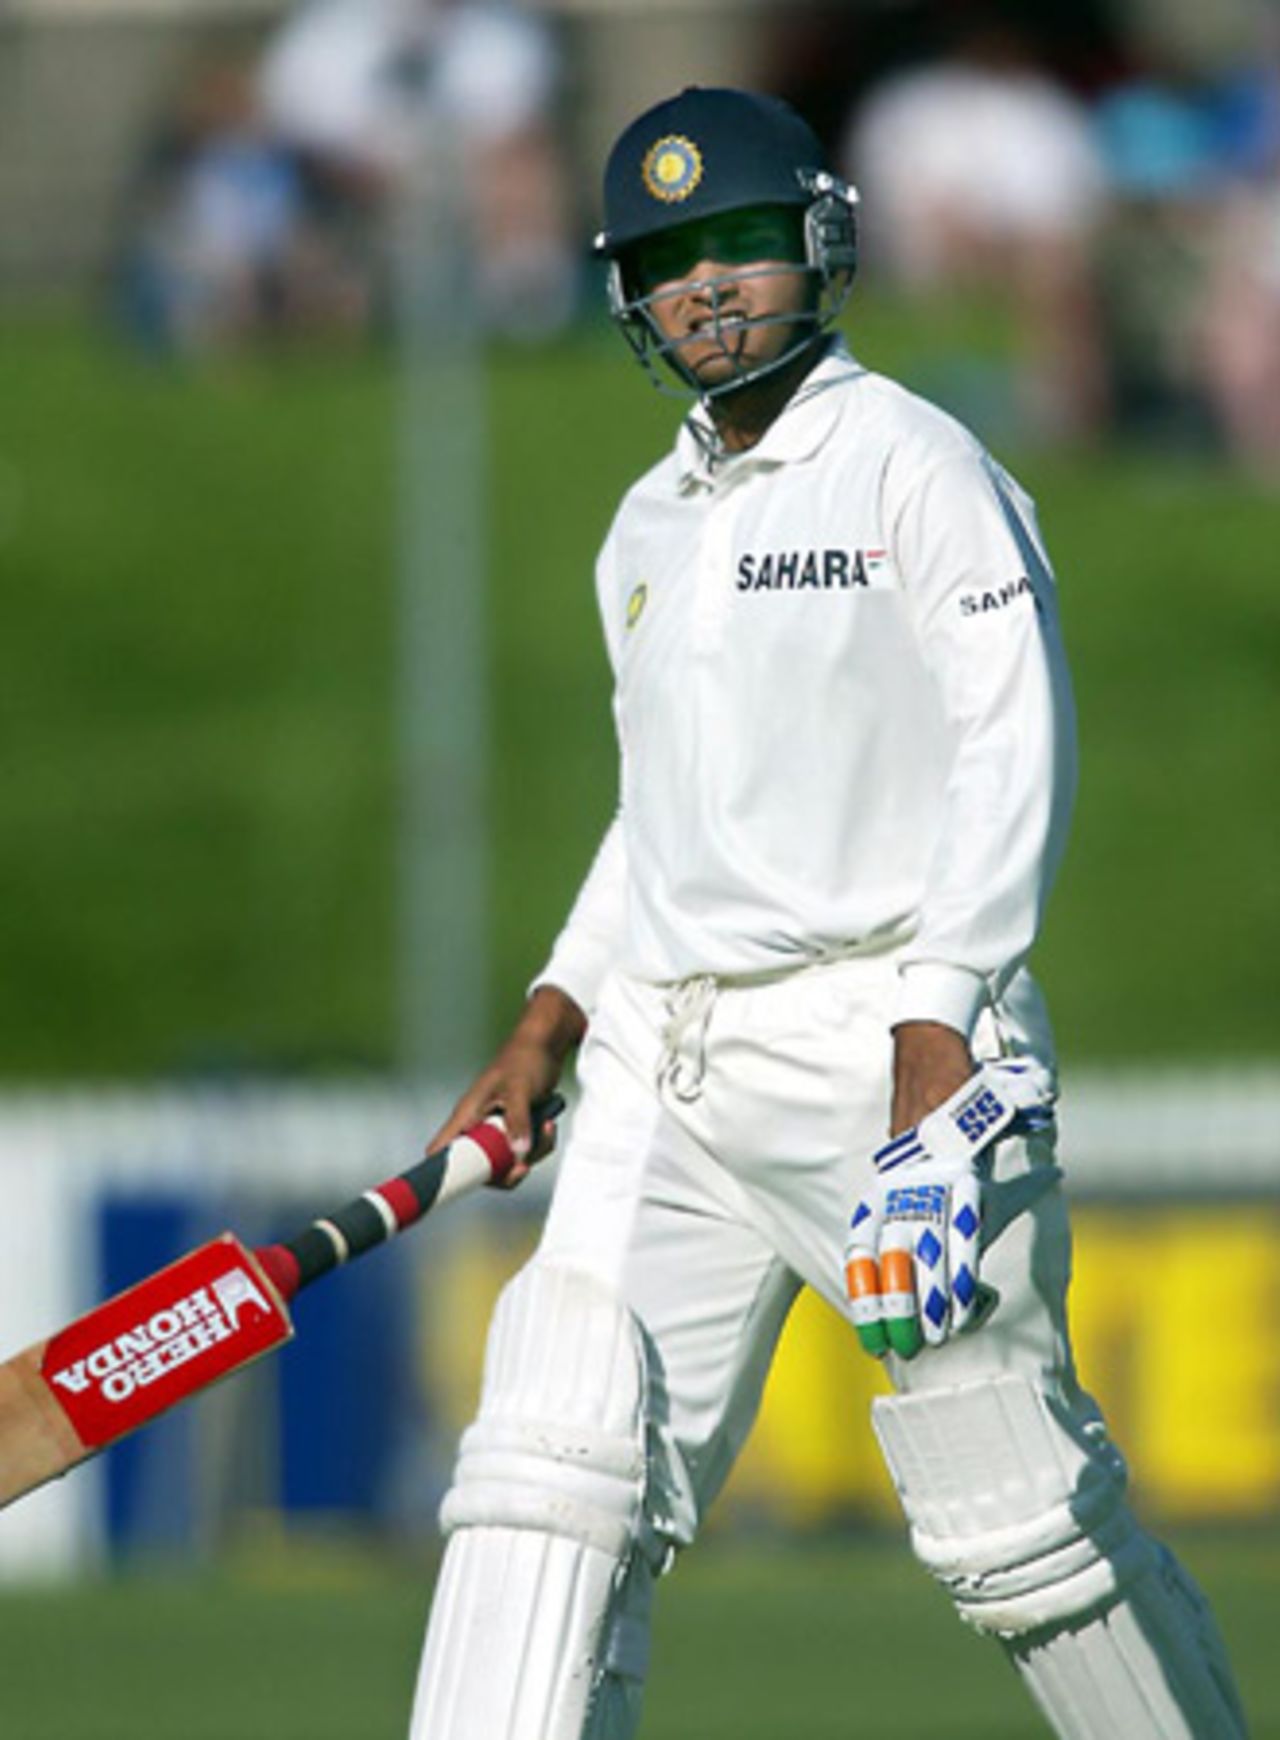 Indian batsman Sourav Ganguly leaves the field after being dismissed, caught by New Zealand fielder Stephen Fleming at first slip off the bowling of Daryl Tuffey for five. 2nd Test: New Zealand v India at Westpac Park, Hamilton, 19-23 December 2002 (20 December 2002).